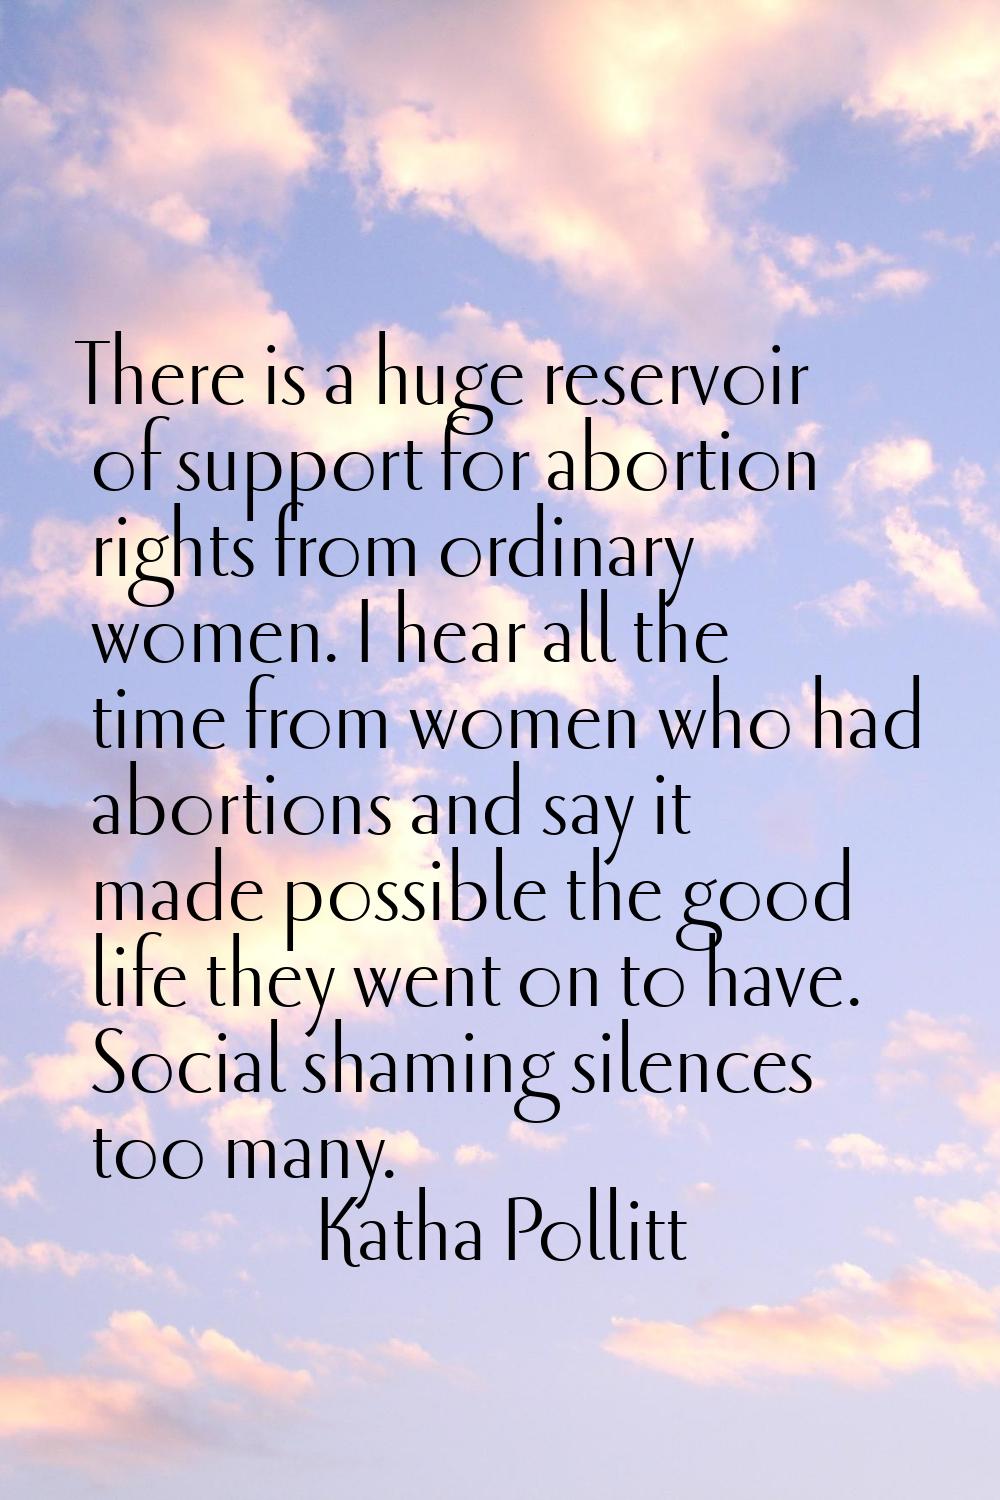 There is a huge reservoir of support for abortion rights from ordinary women. I hear all the time f